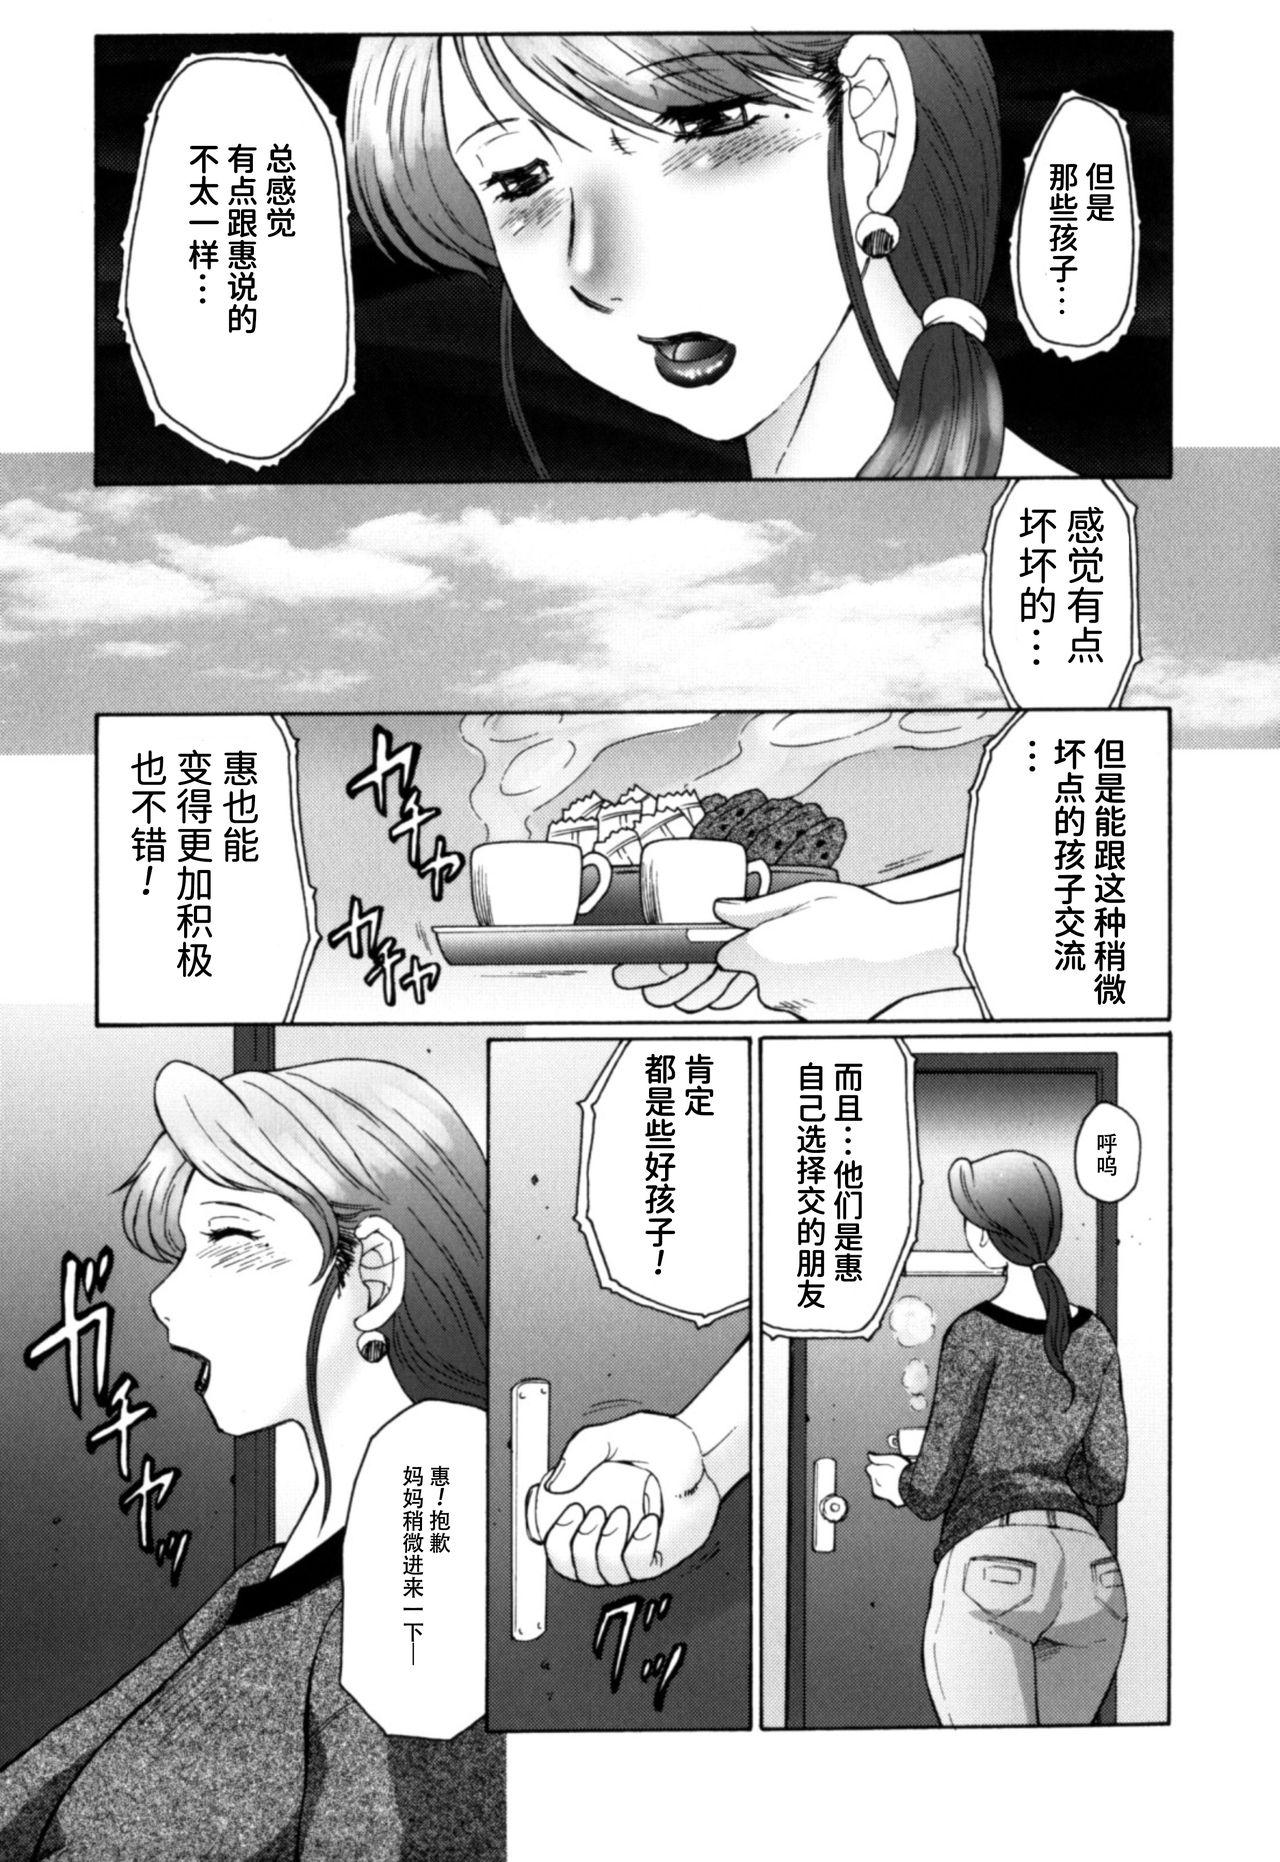 Mmd [Fuusen Club] Haha Mamire Ch. 1 [Chinese]【不可视汉化】 Pure18 - Page 6